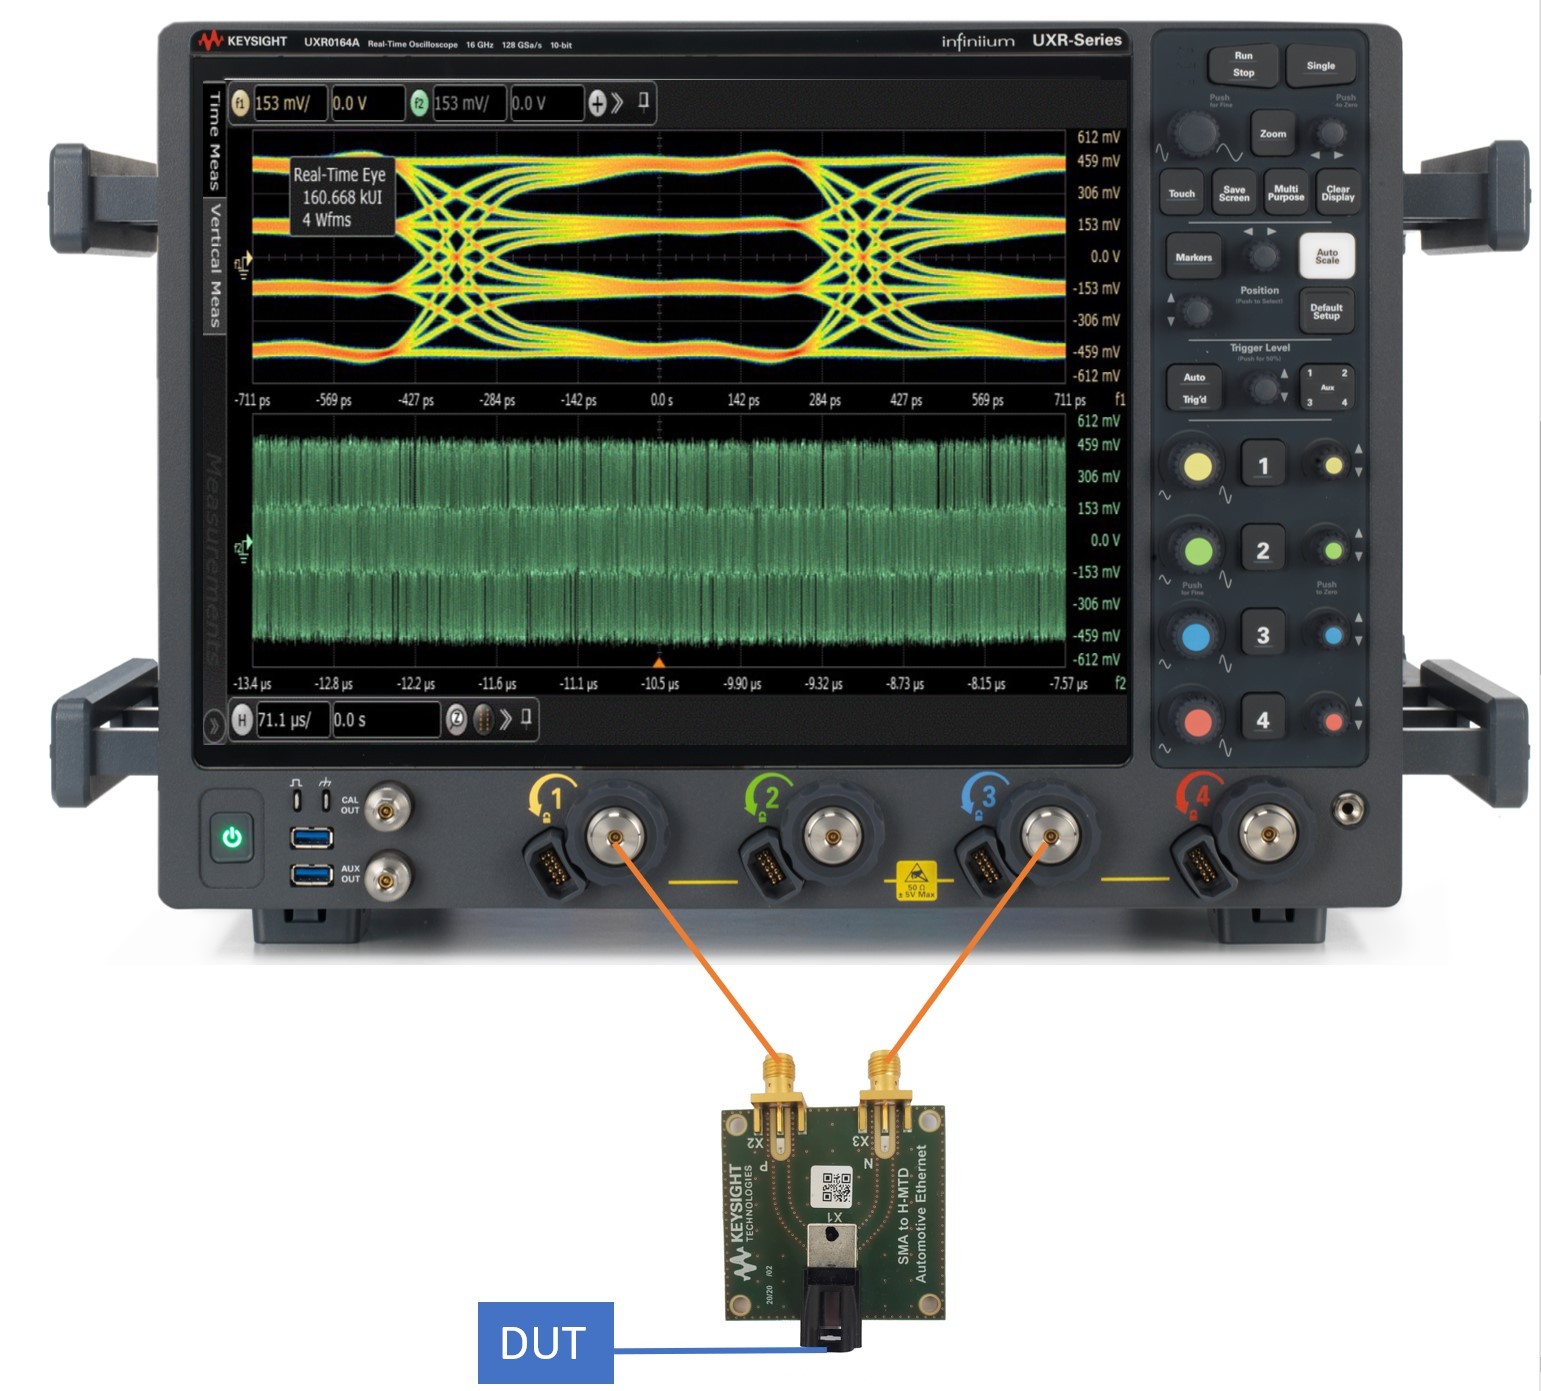 Automotive Ethernet test, analysis and validation tool